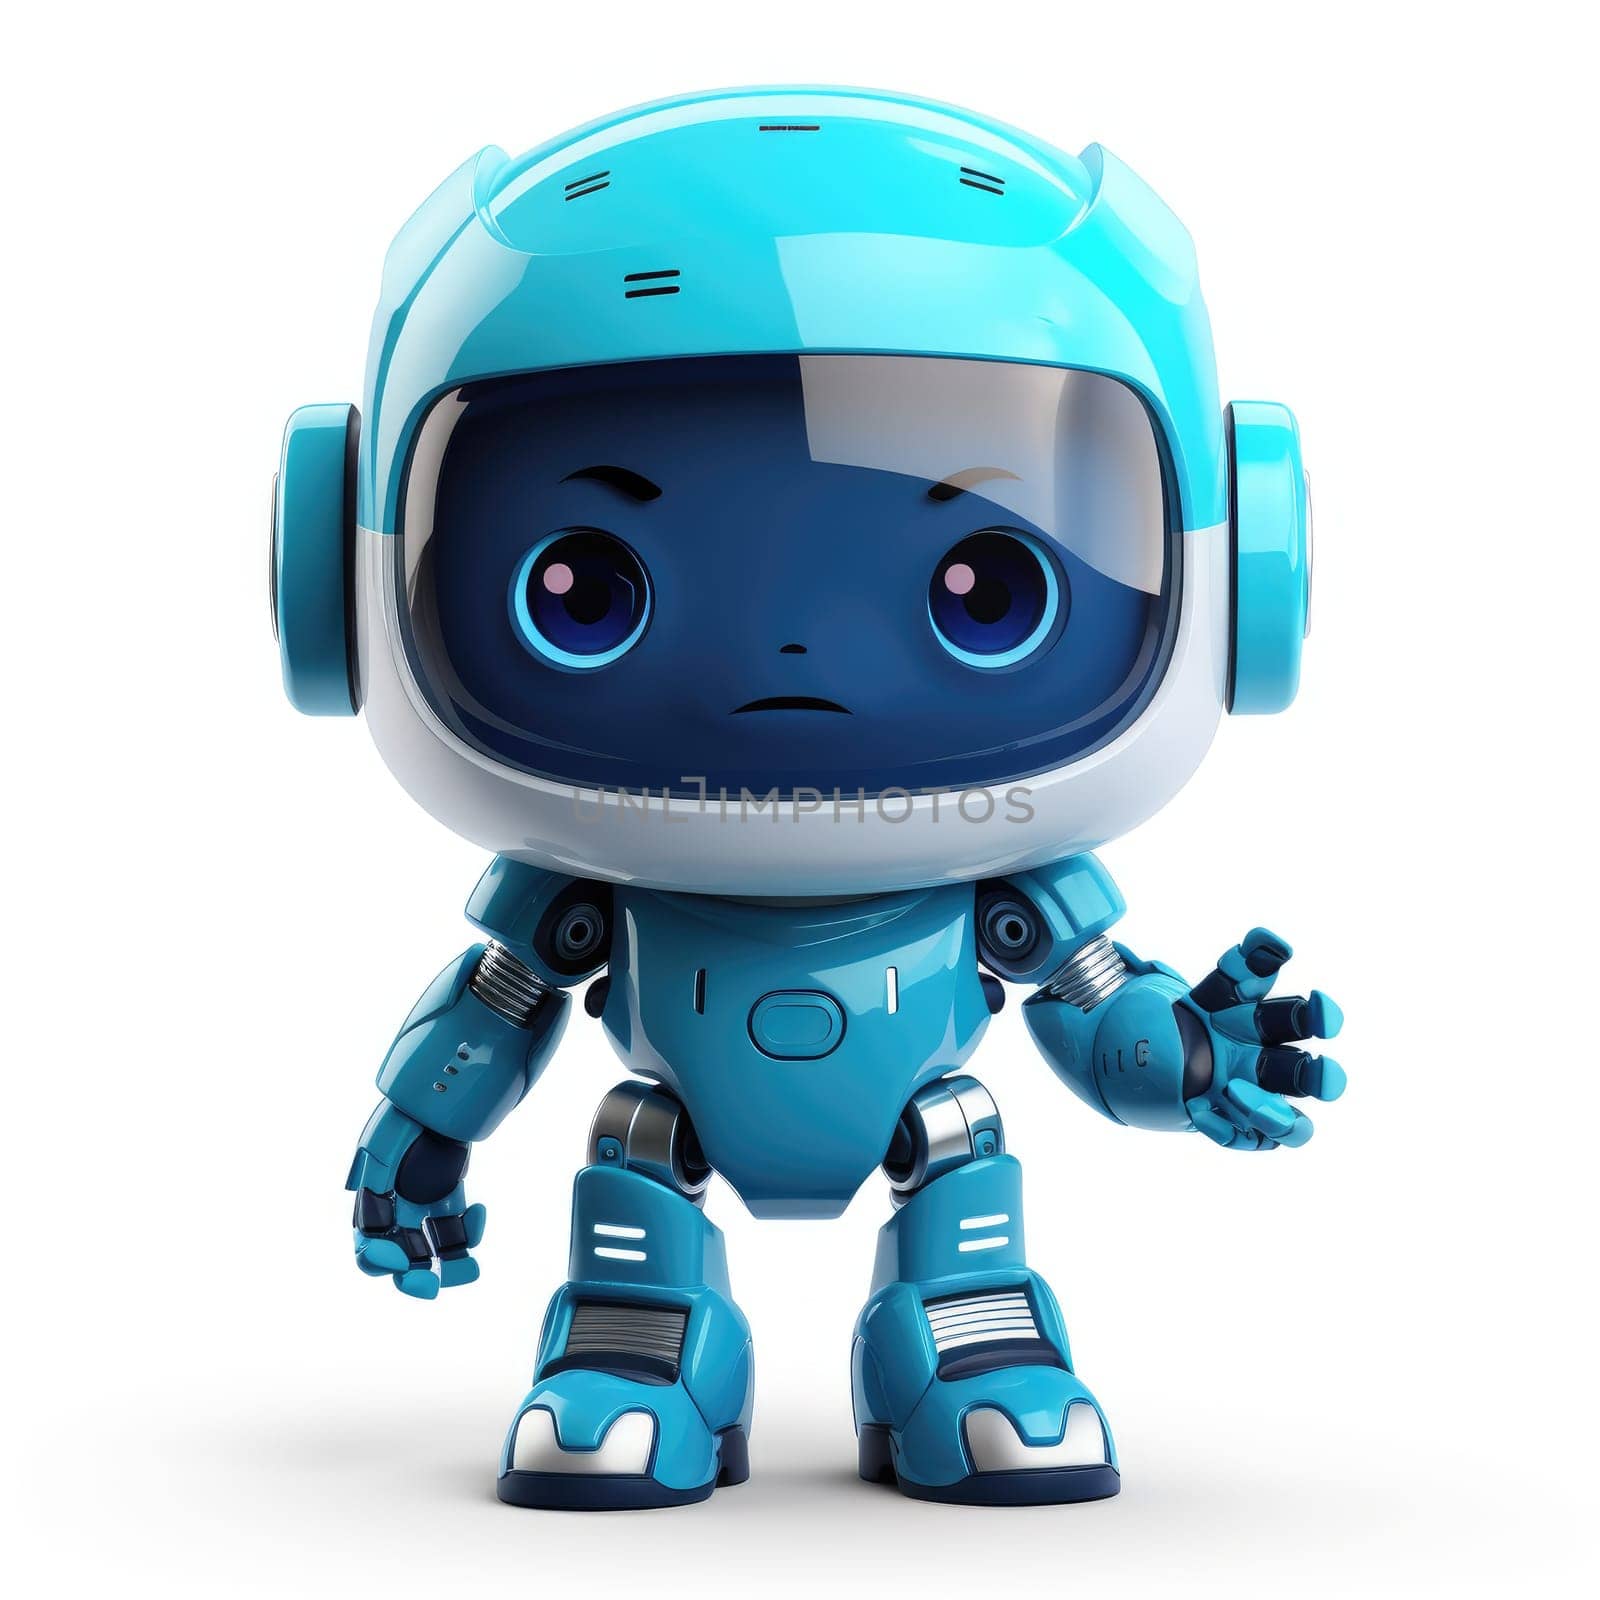 Small serious robot on white background by Yurich32